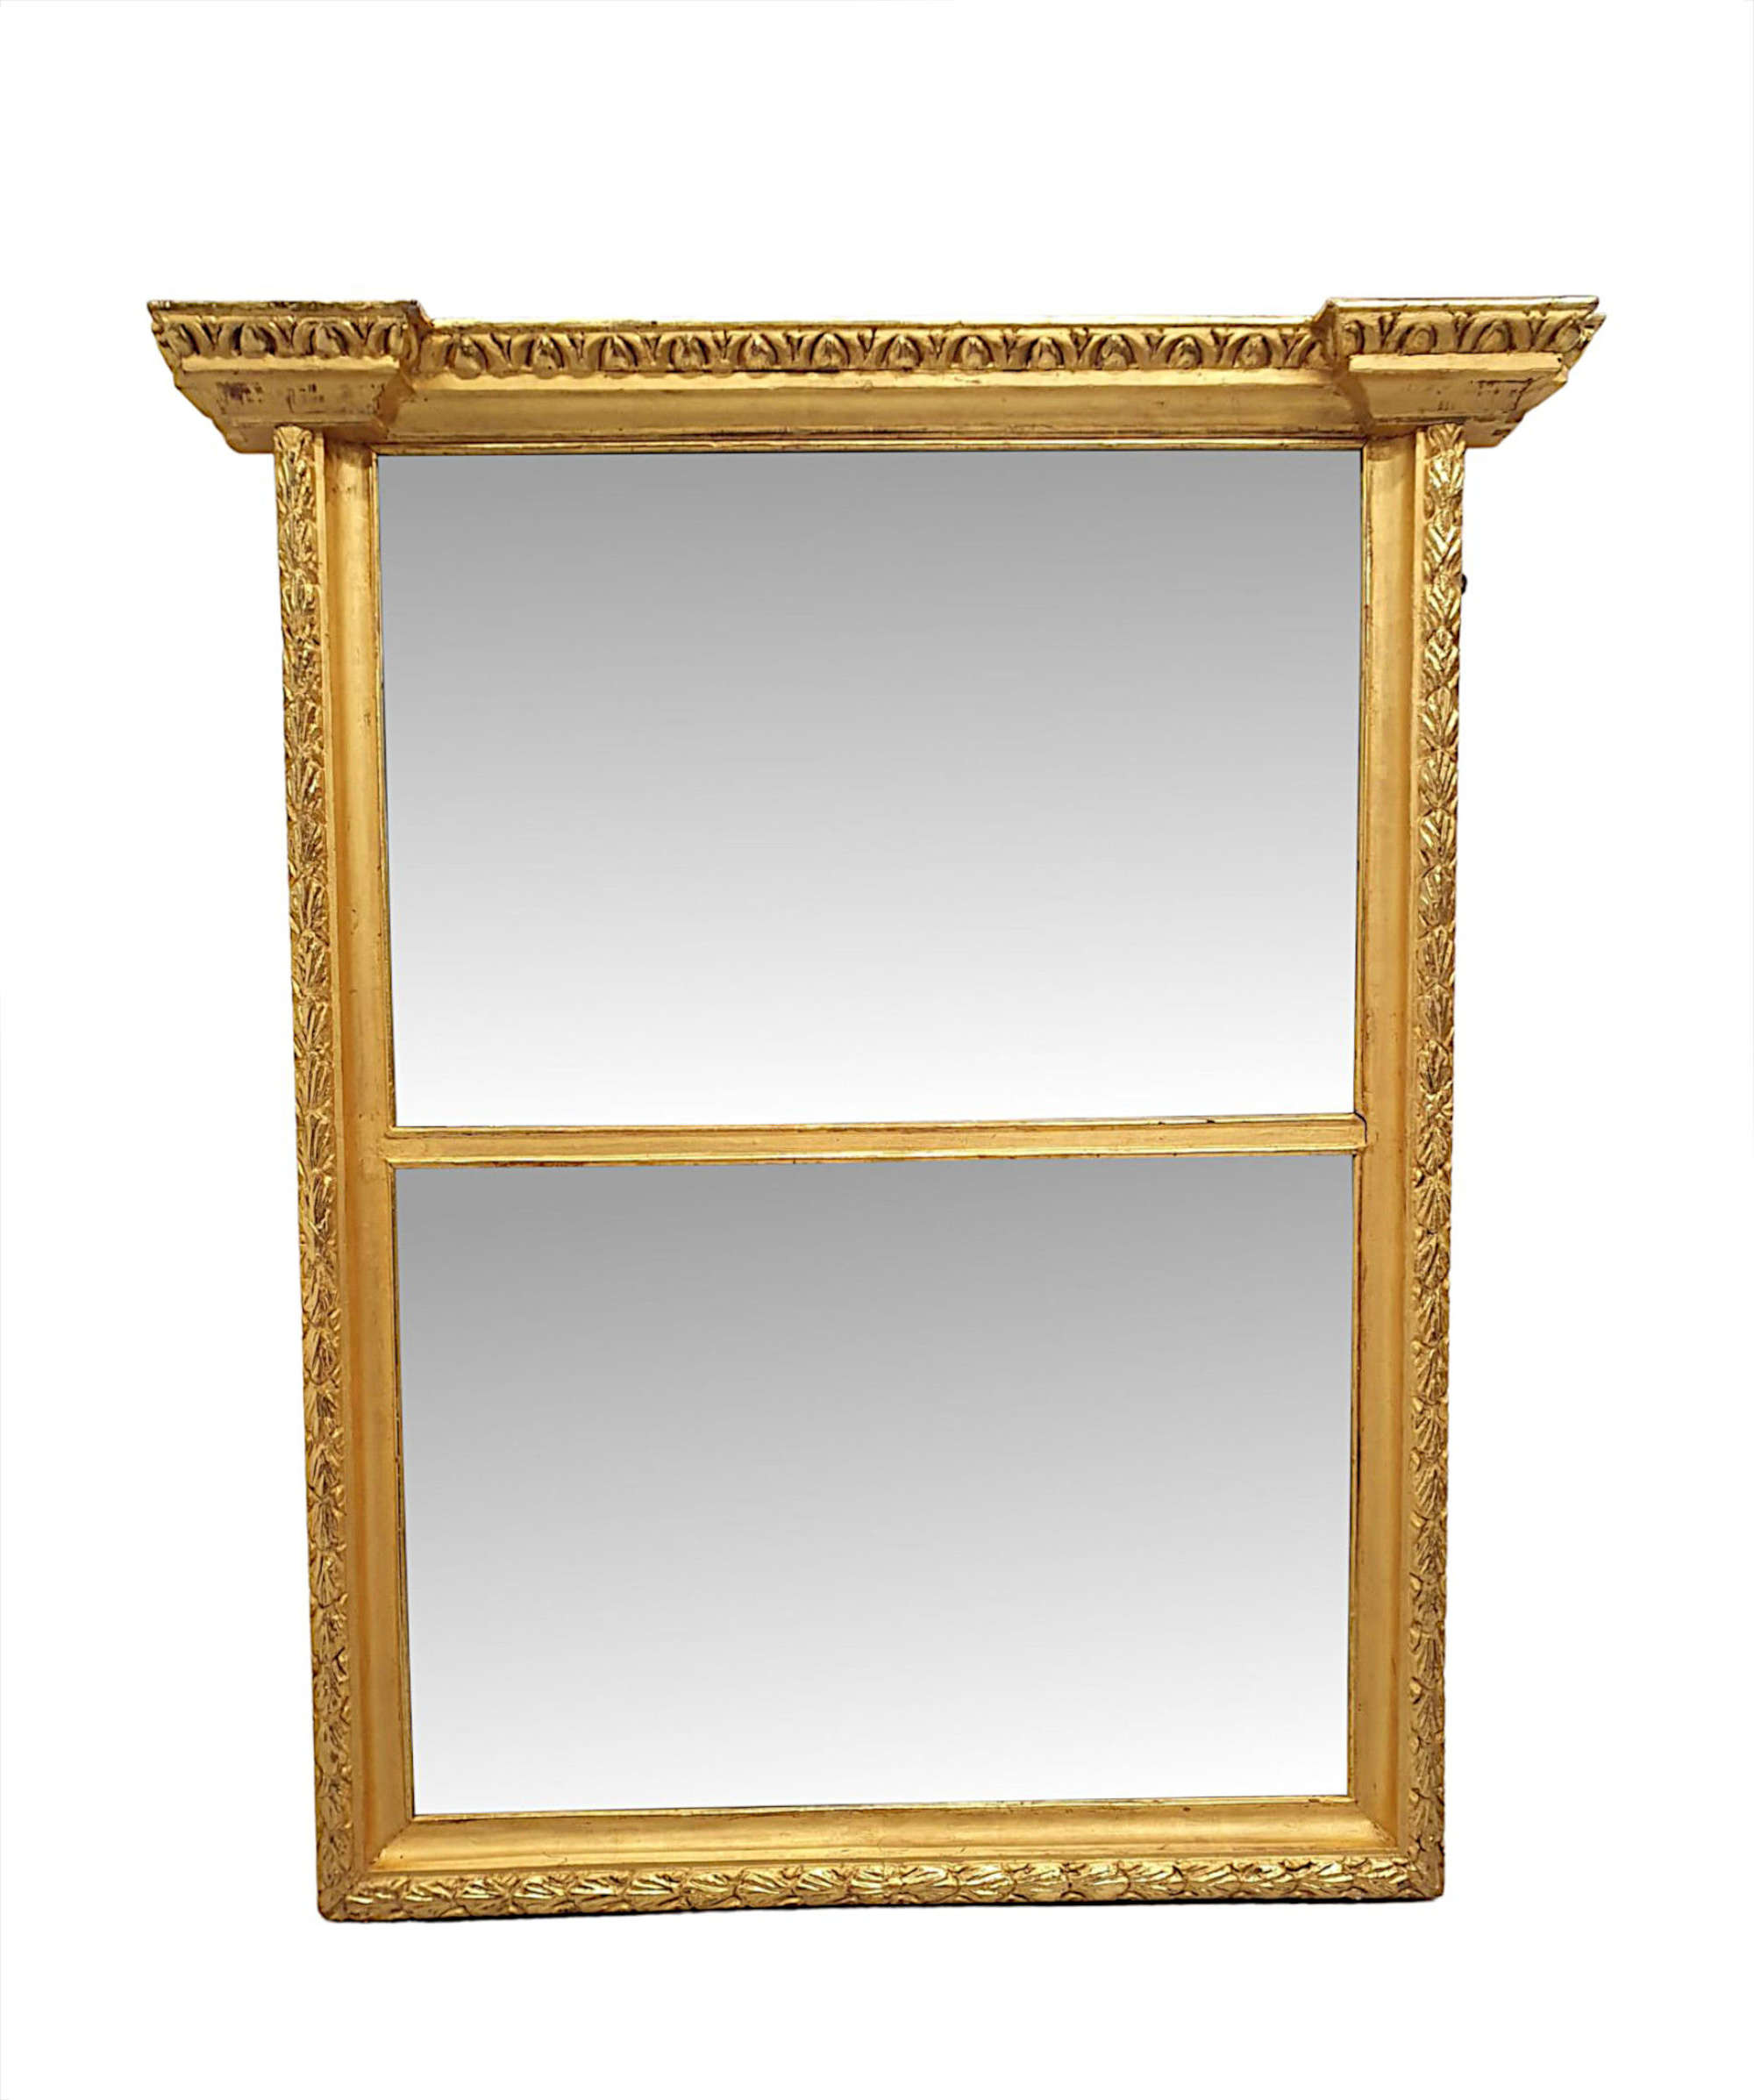 A Very Fine And Unusual 19th Century Compartmental Antique Overmantle Mirror